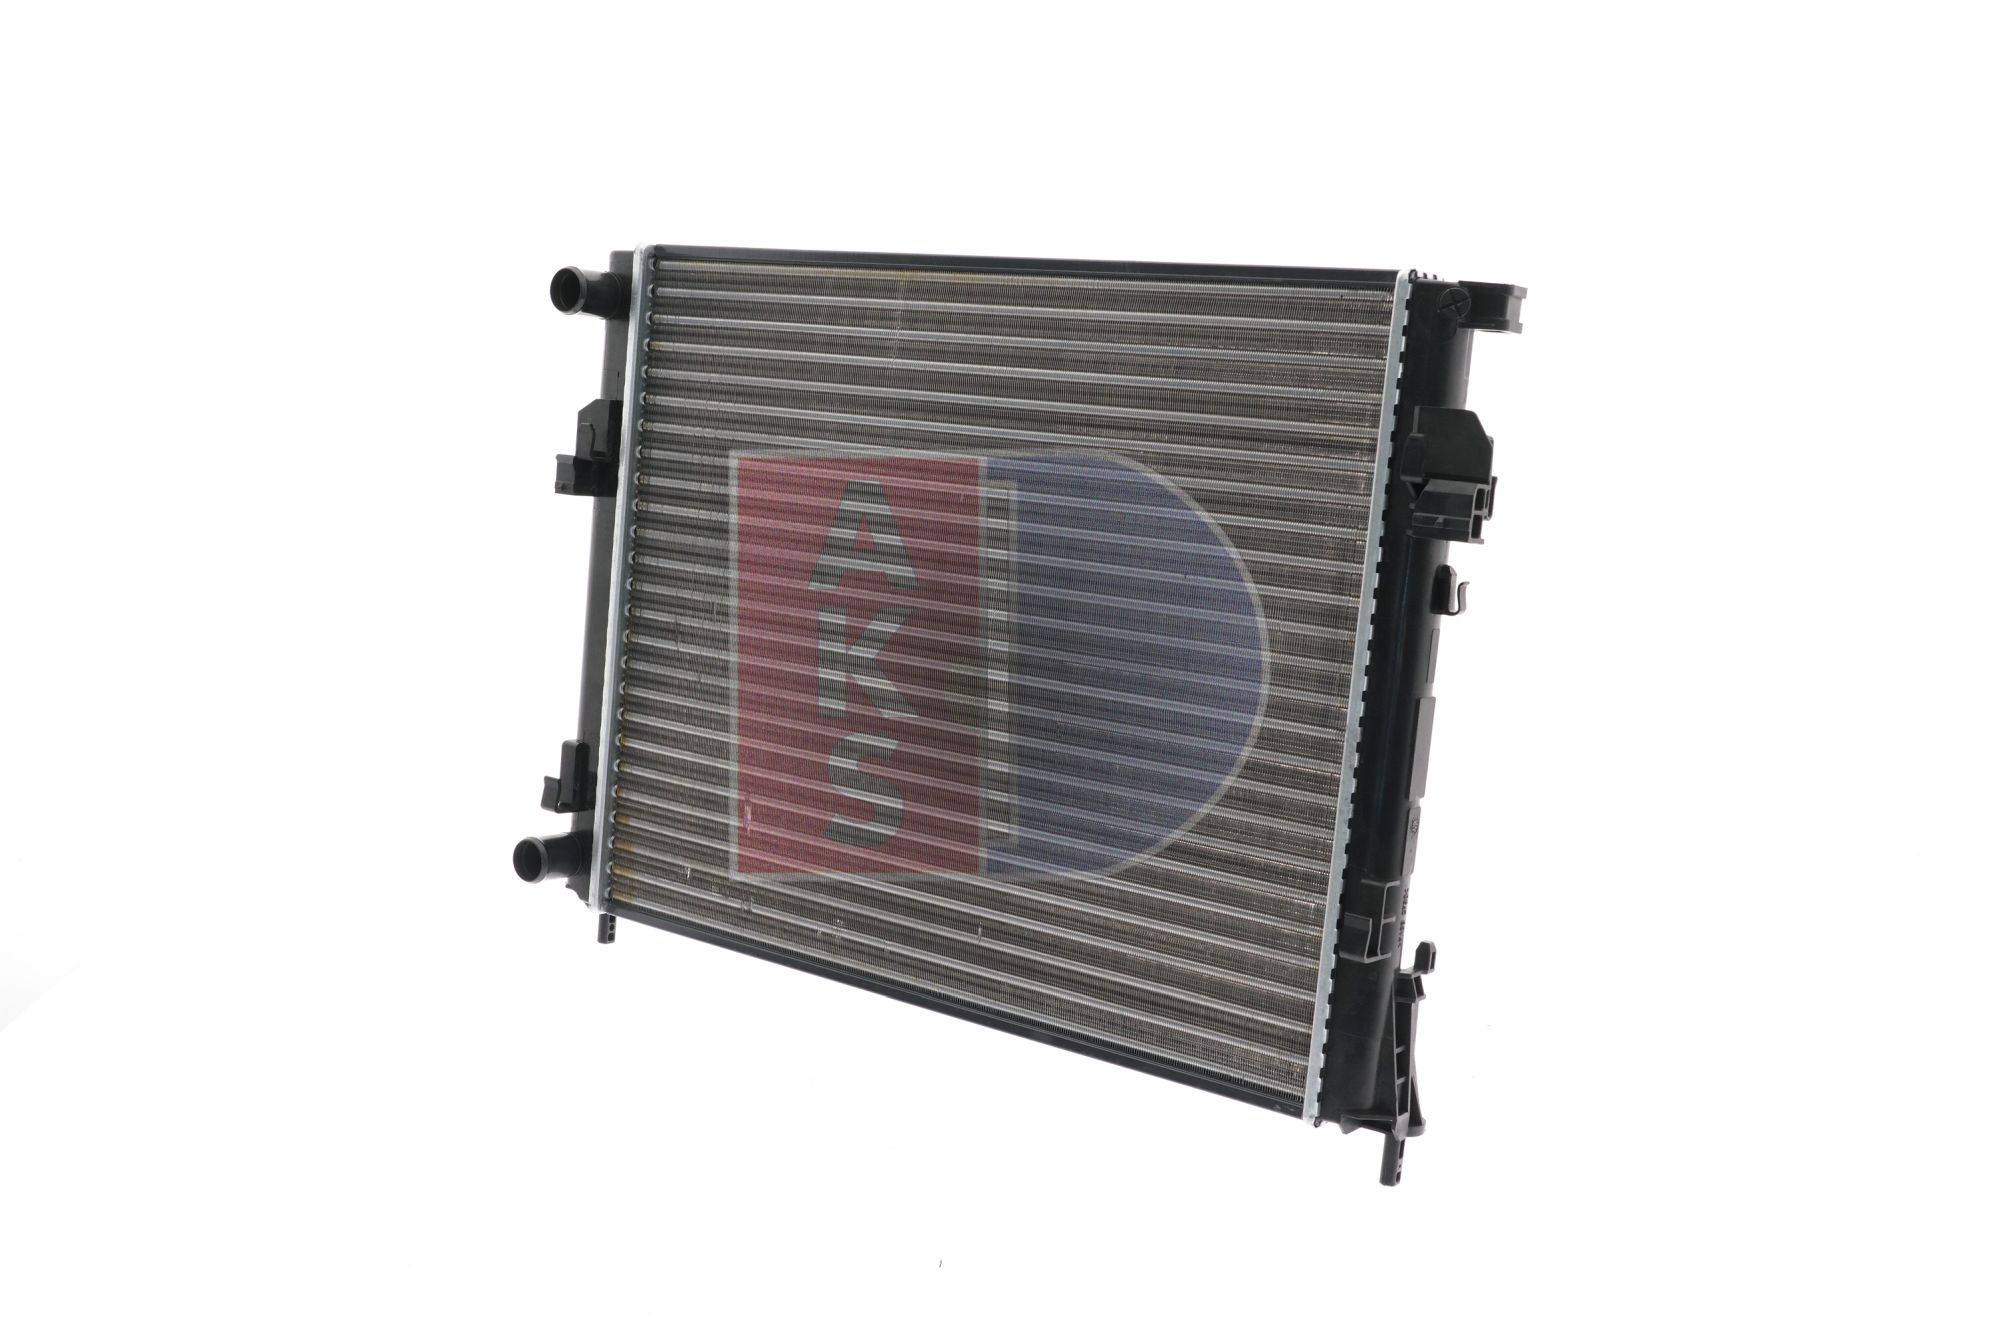 AKS DASIS 180052N Engine radiator 560 x 469 x 28 mm, Mechanically jointed cooling fins